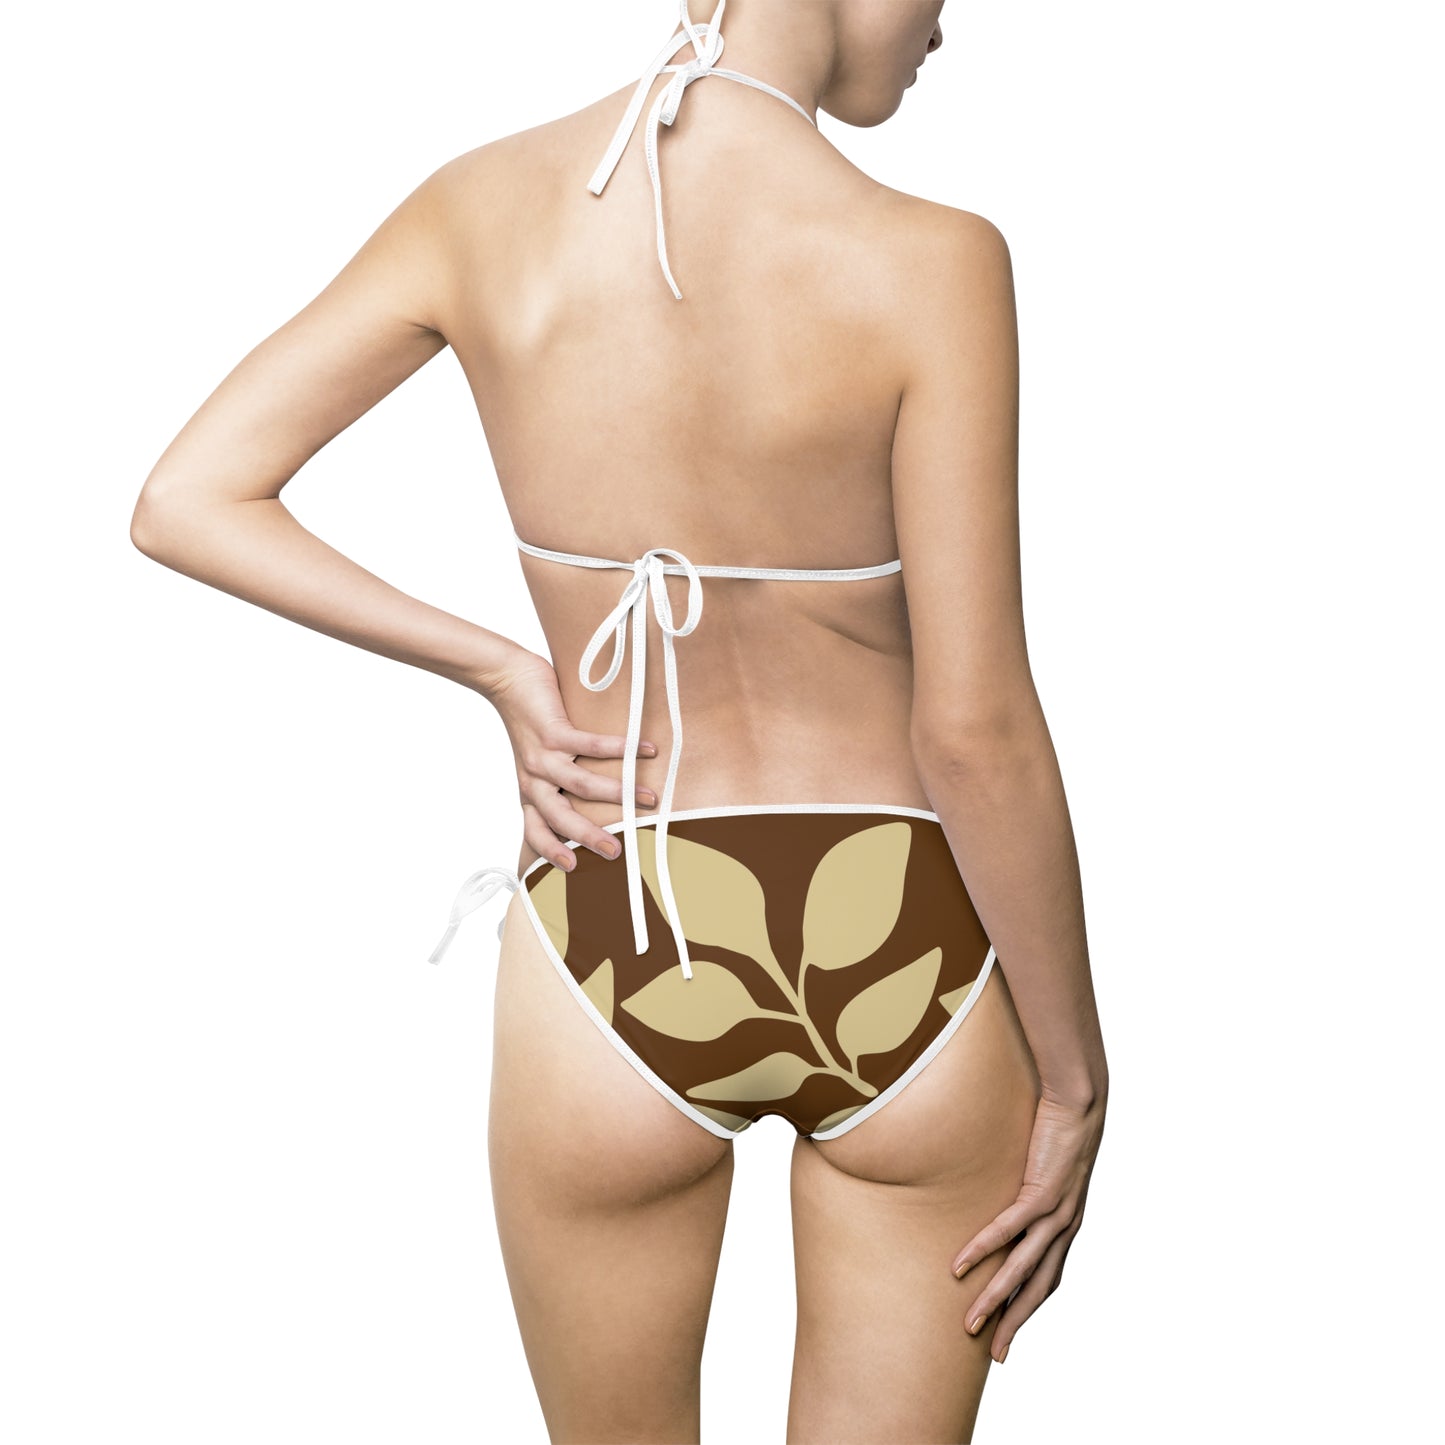  Brown Bikini Swimsuit   This bikini swimsuit is designed for fashionable women, stylish and personalized. Advance heat sublimation technique